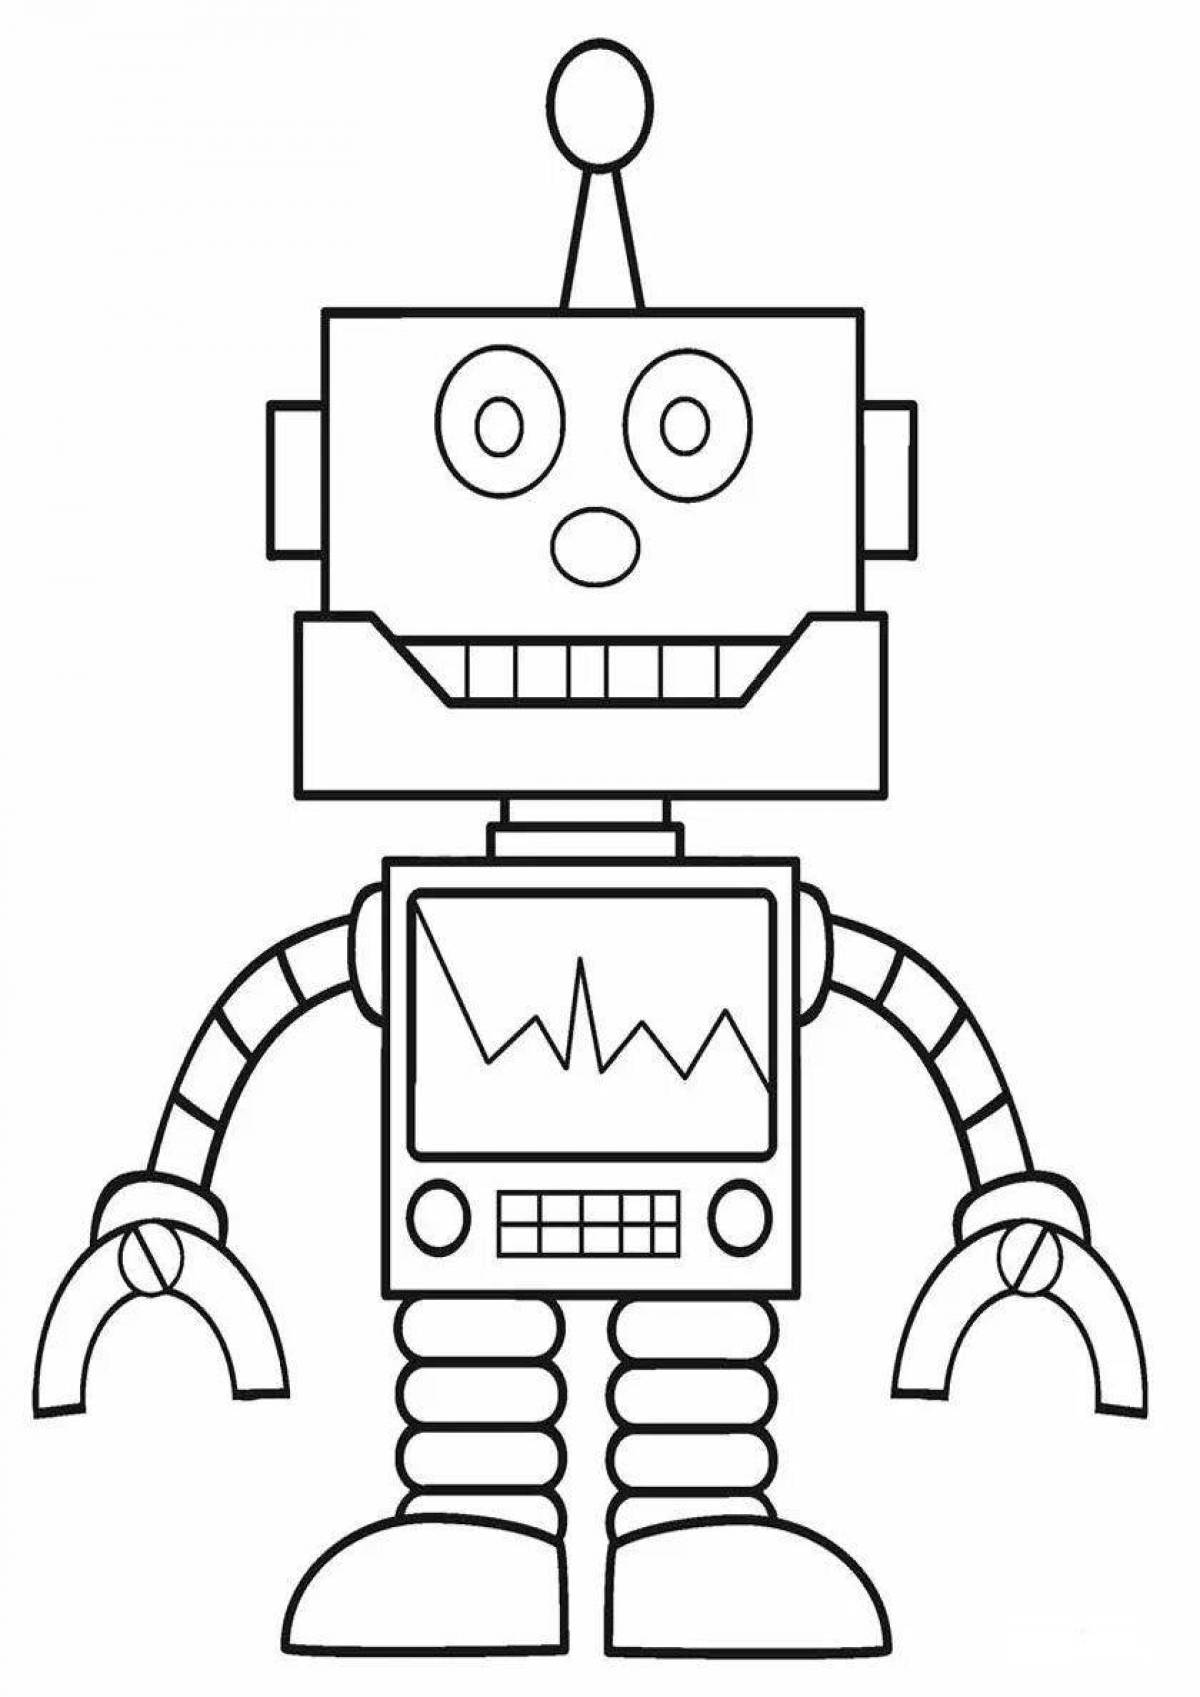 Stimulating coloring robots for 5-6 year old boys